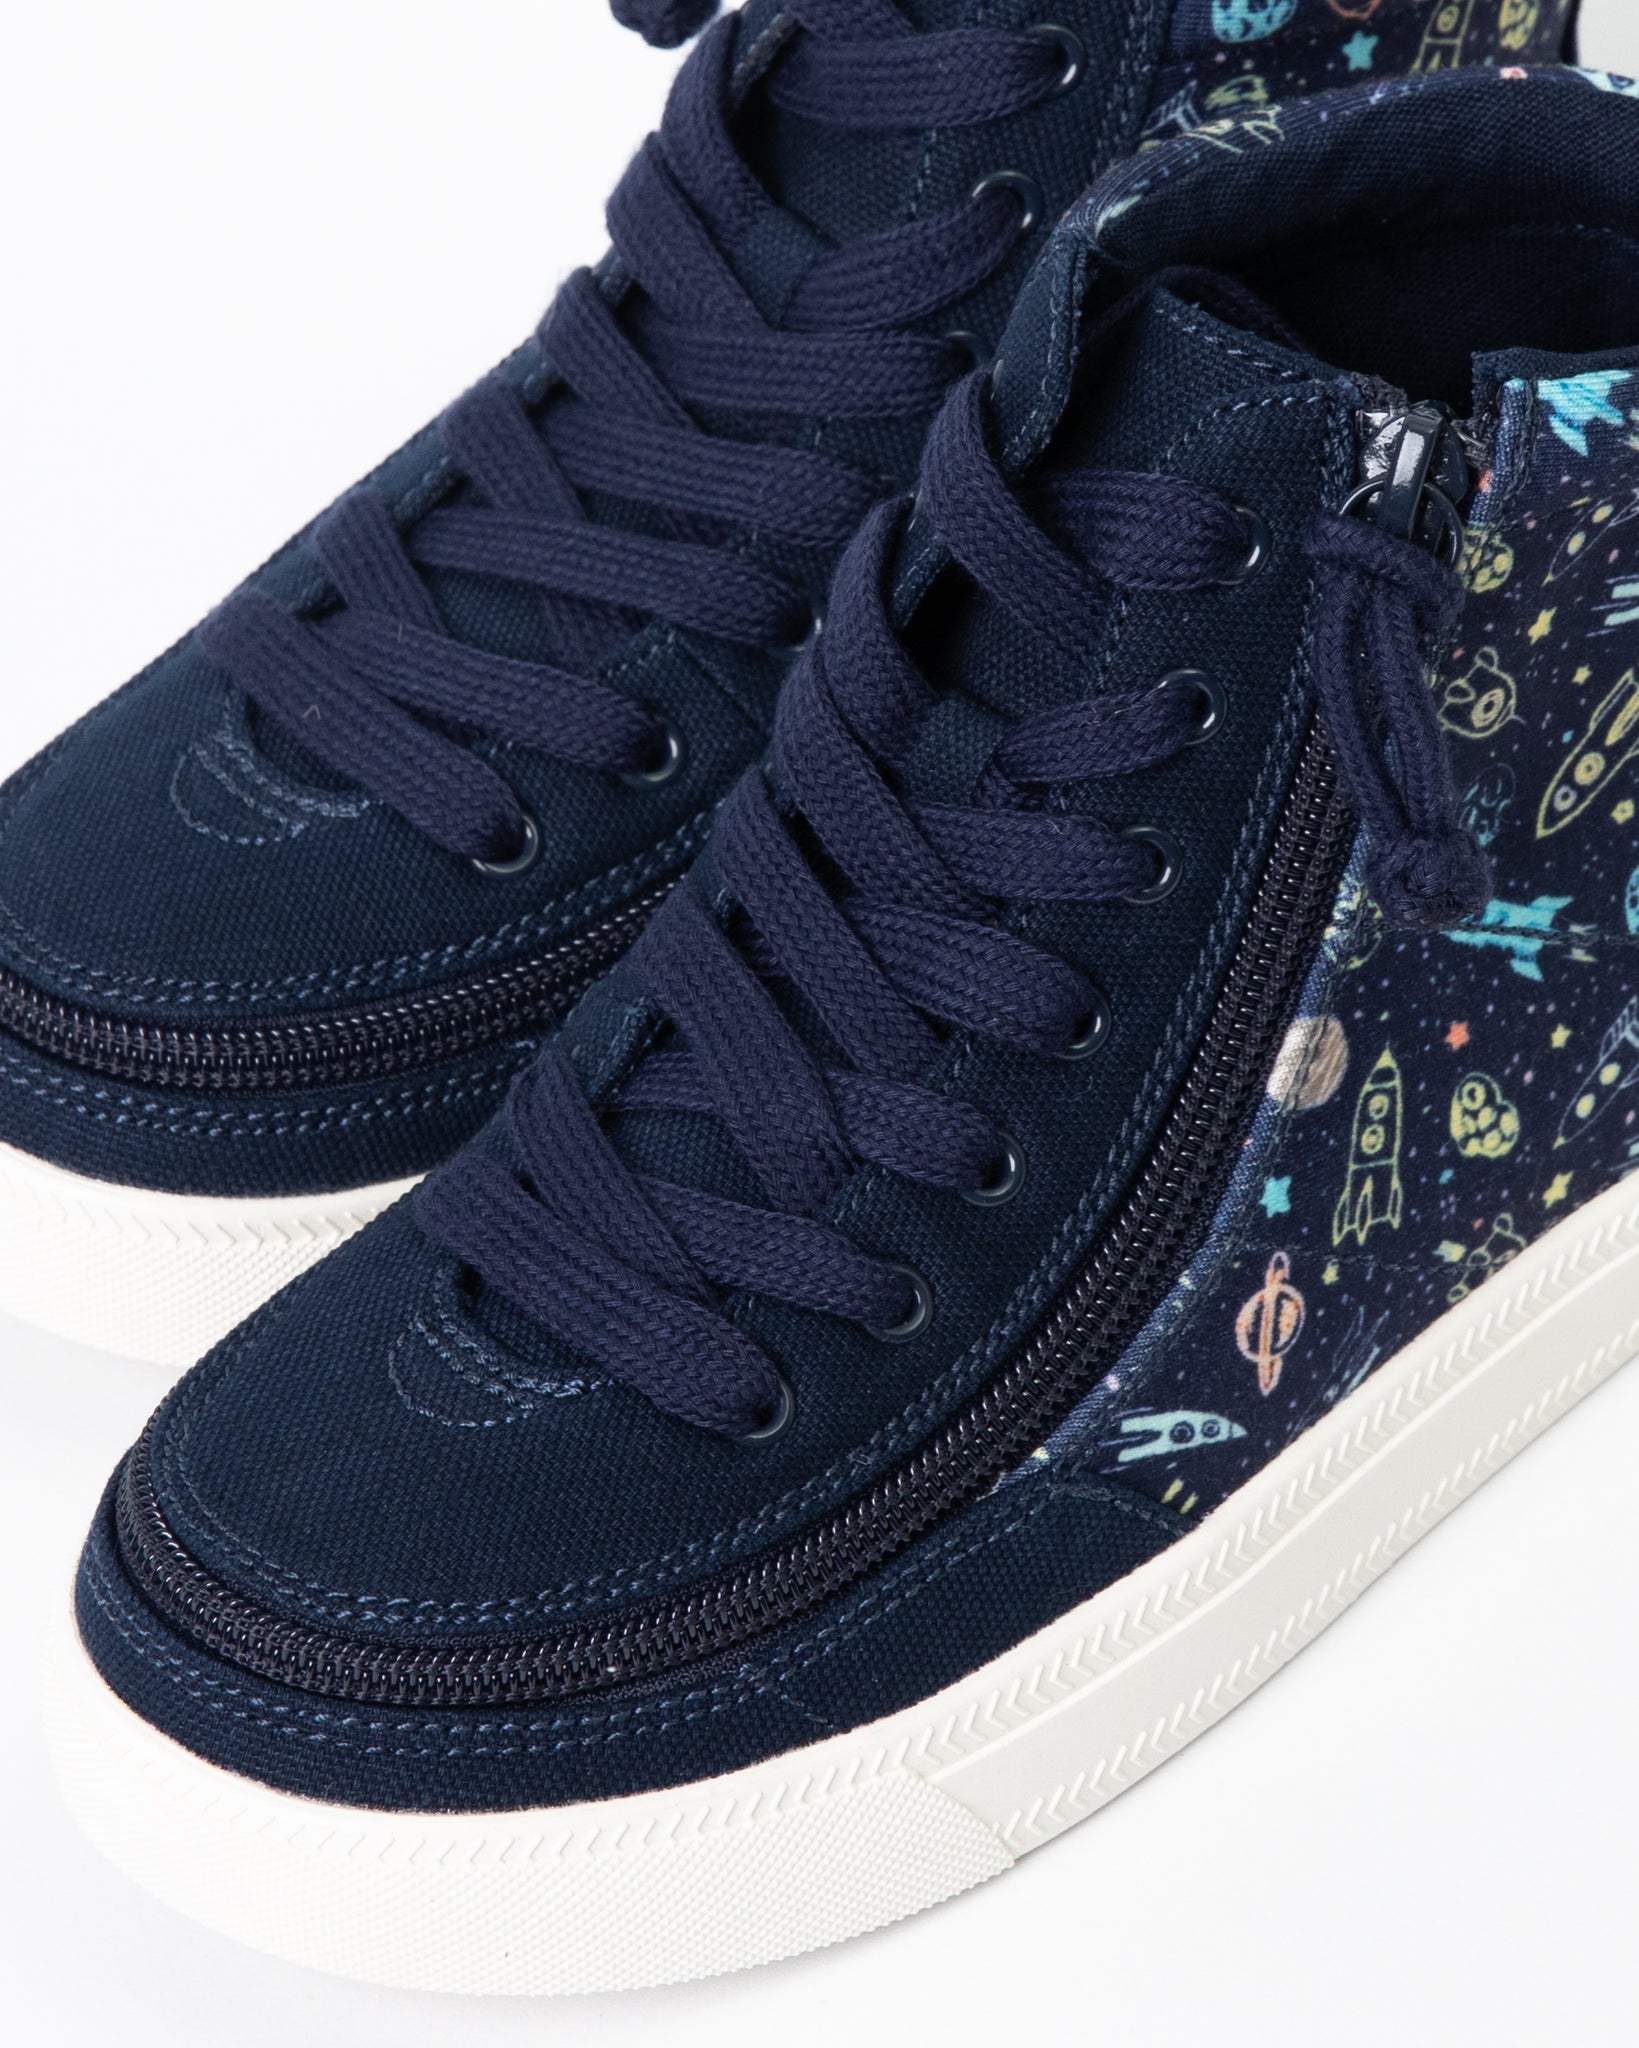 Classic High Top (Kids) - Navy Space